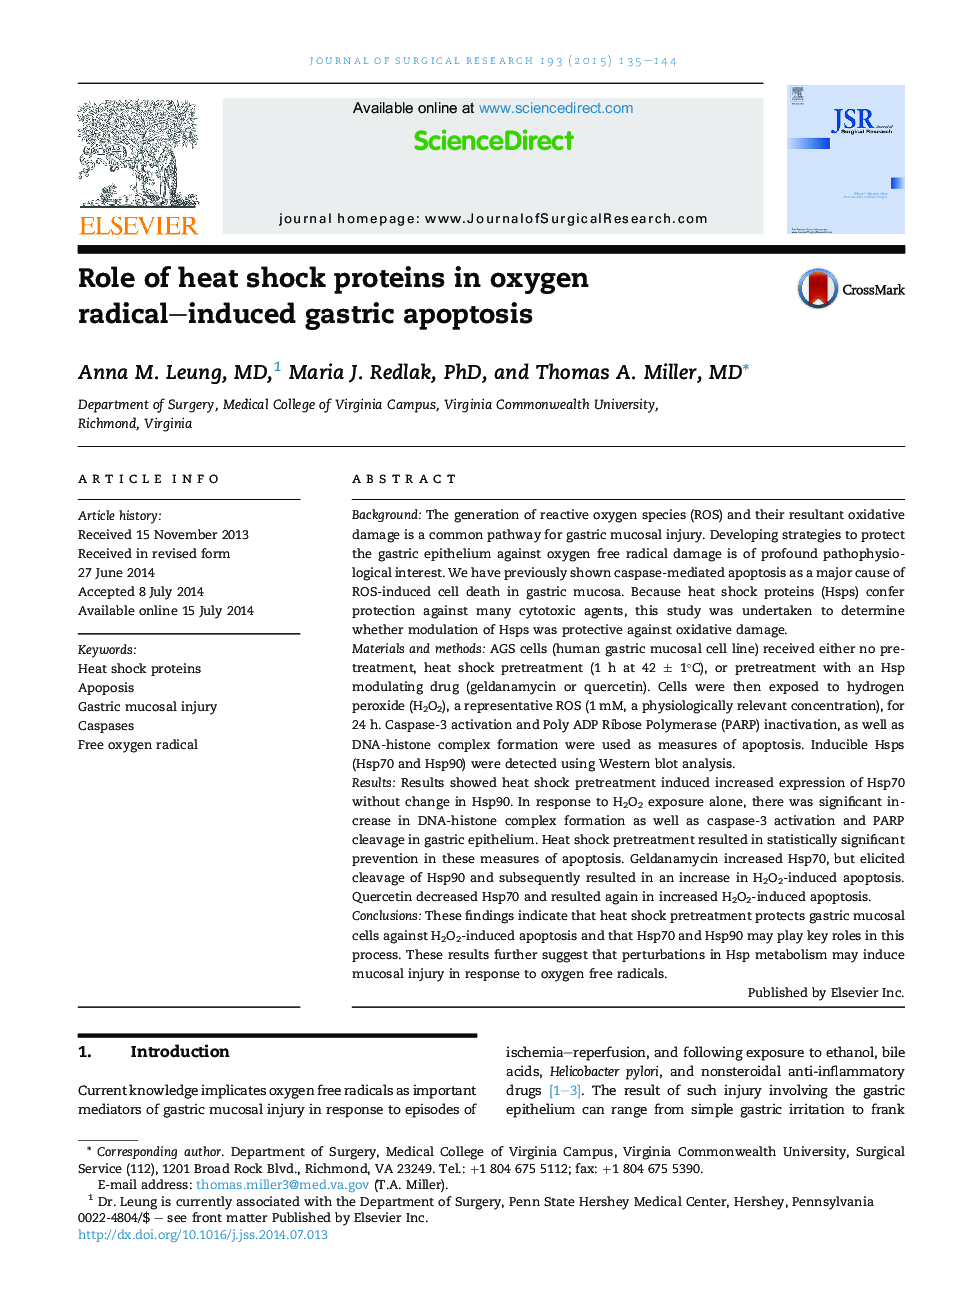 GastrointestinalRole of heat shock proteins in oxygen radical-induced gastric apoptosis